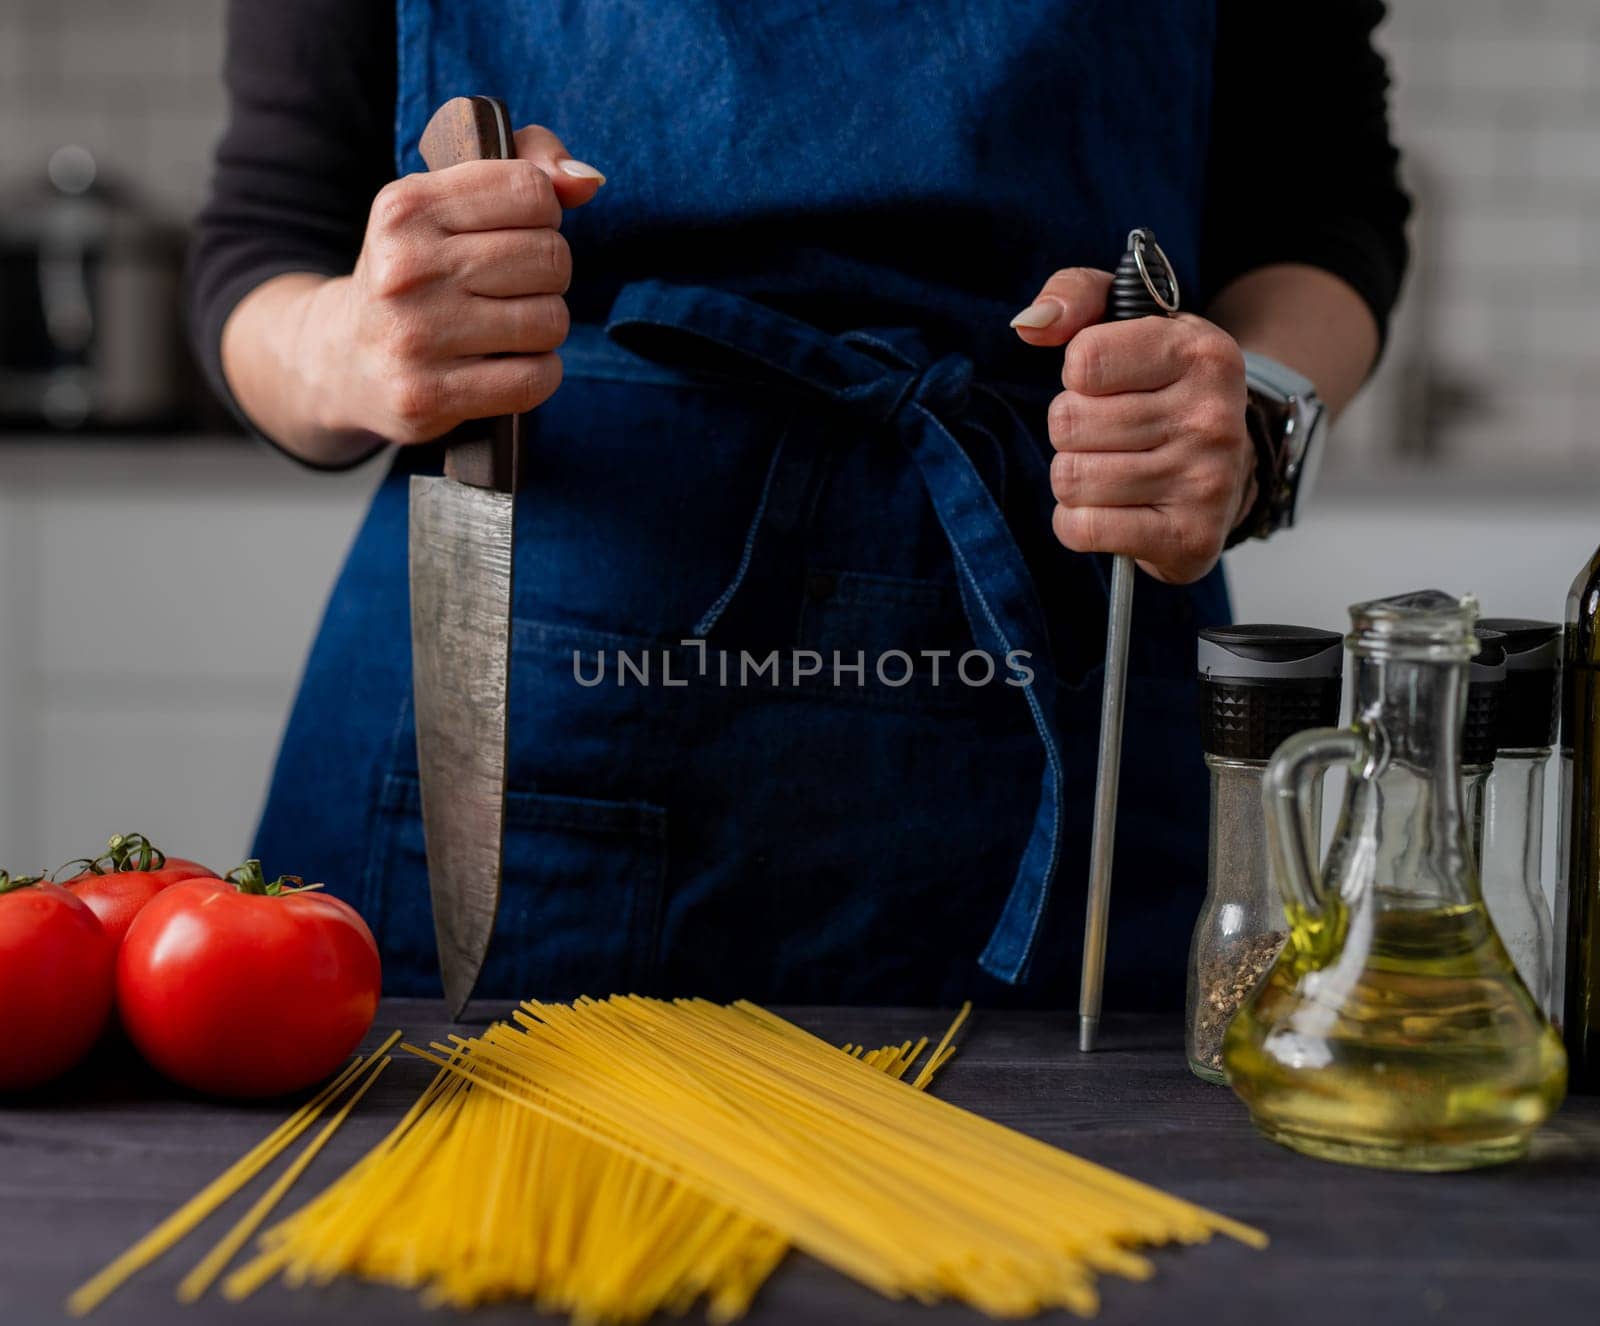 Large Kitchen Knife And Sharpener In Woman'S Hands, Close Up by tan4ikk1